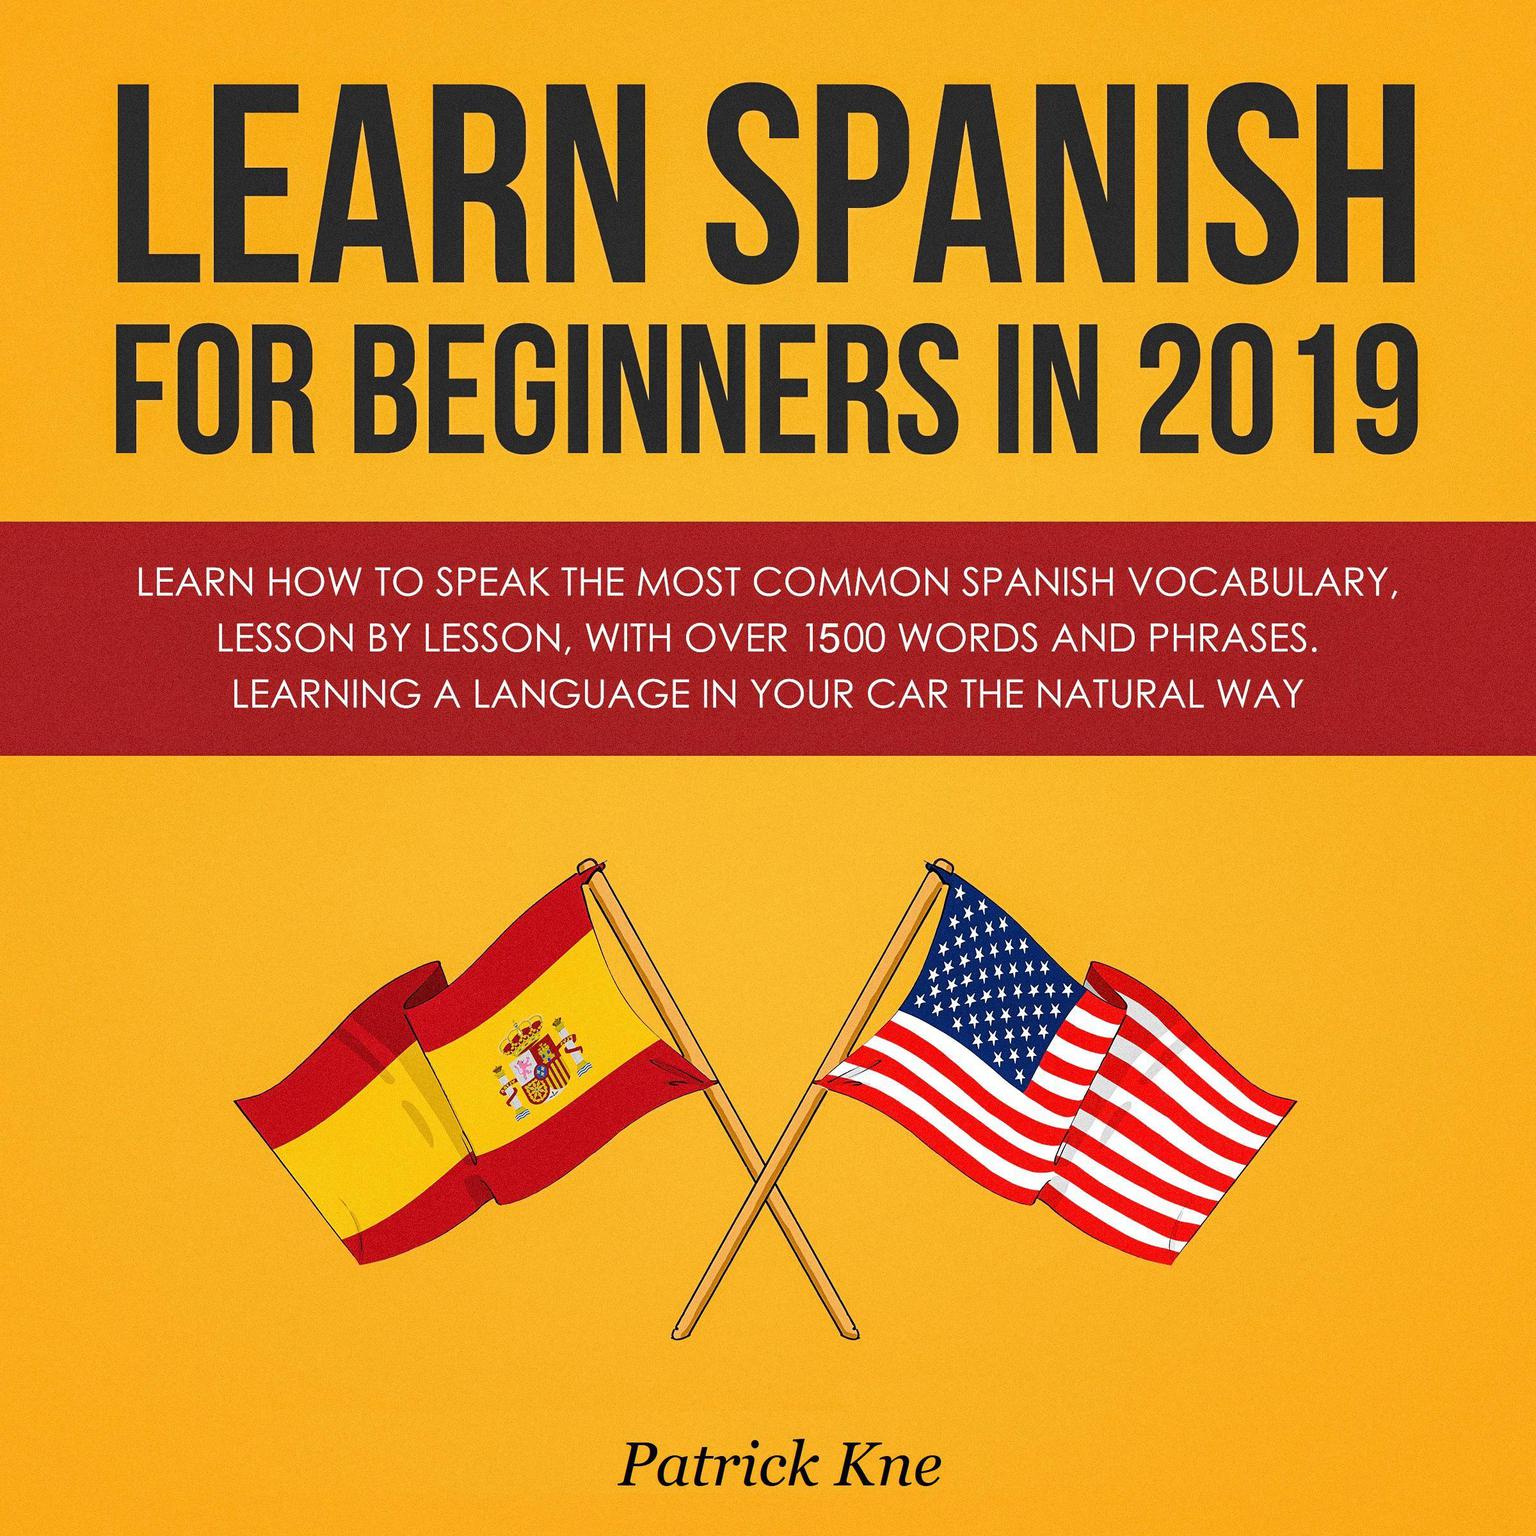 Learn Spanish for Beginners in 2019: Learn How to Speak the Most Common Spanish Vocabulary, Lesson by Lesson, with Over 1500 Words and Phrases. Learning a Language in Your Car the Natural Way: Learn How to Speak the Most Common Spanish Vocabulary, Lesson by Lesson, with Over 1500 Words and Phrases. Learning a Language in Your Car the Natural Way Audiobook, by Patrick Kne